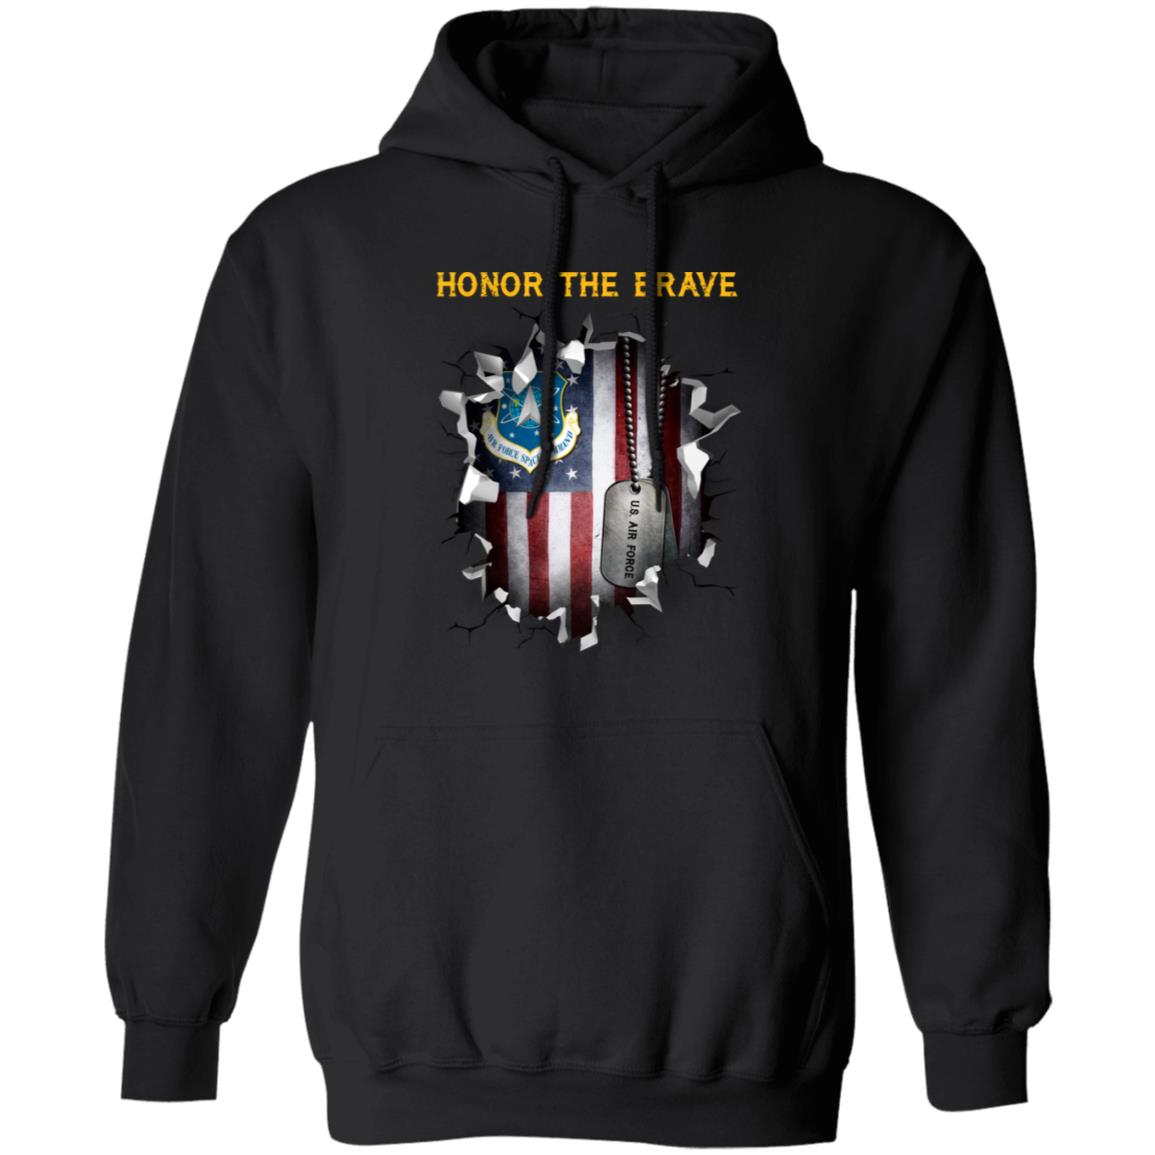 US Air Force Space Command - Honor The Brave Front Shirt